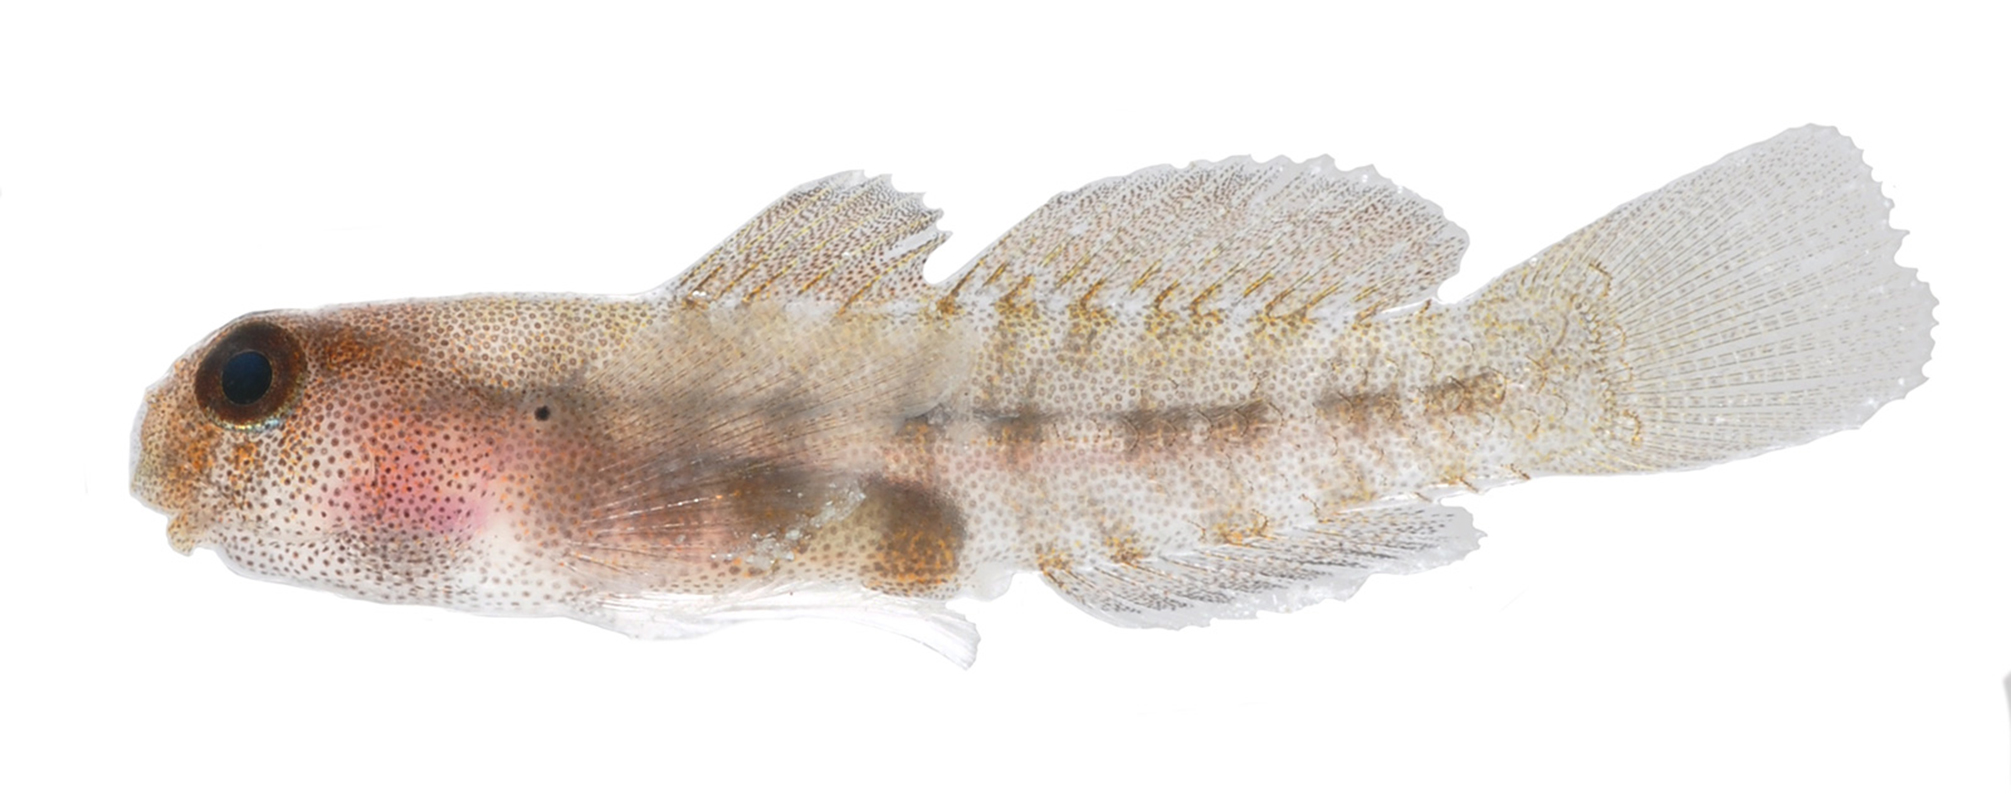 a small preserved fish photographed on a light table